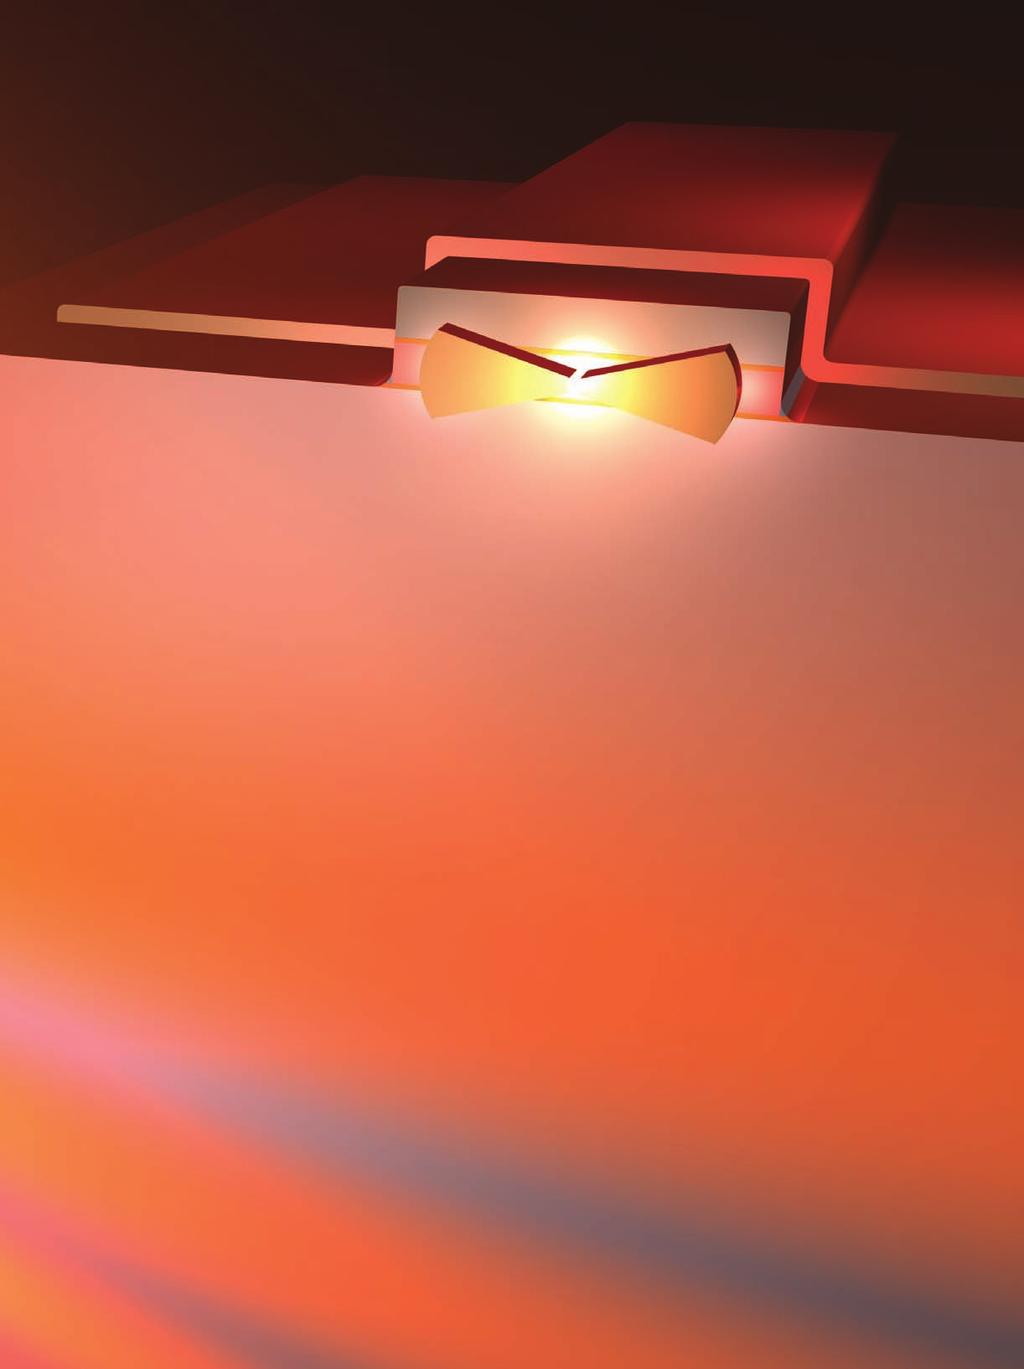 The field of plasmonics in which surface plasmon resonances of metals are used to manipulate light at the sub-wavelength scale is transforming our understanding of nanophotonics and integrated optics.